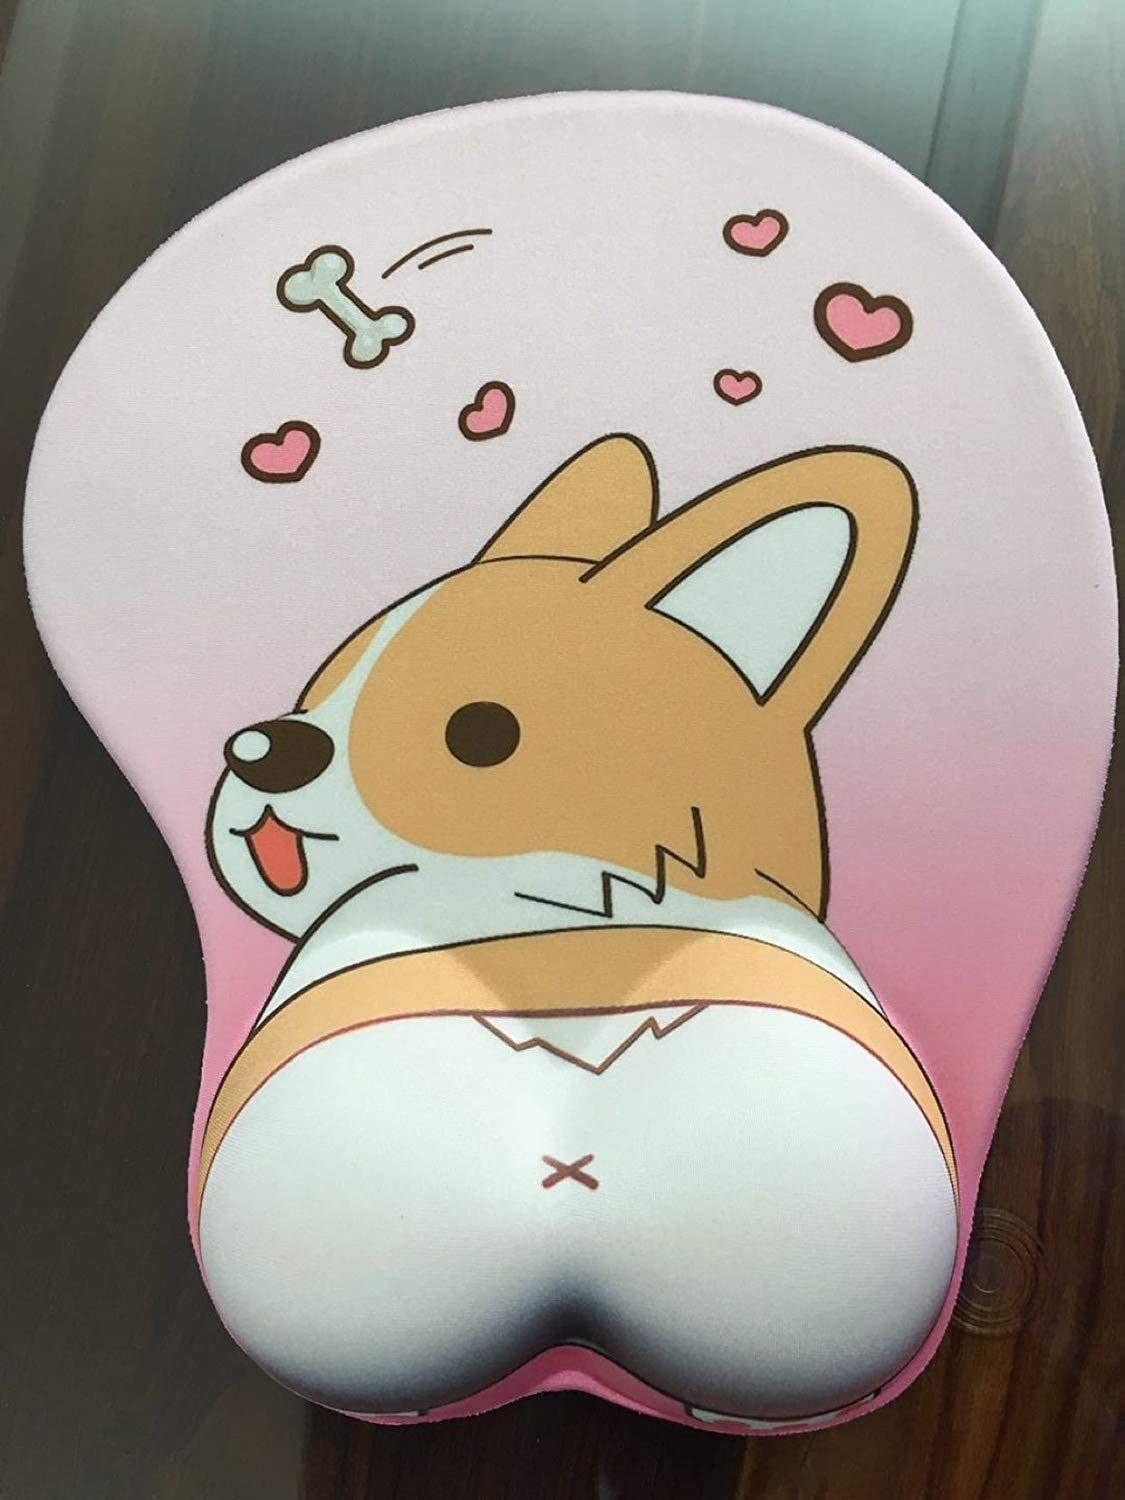 the mousepad with the corgis butt as the padded area